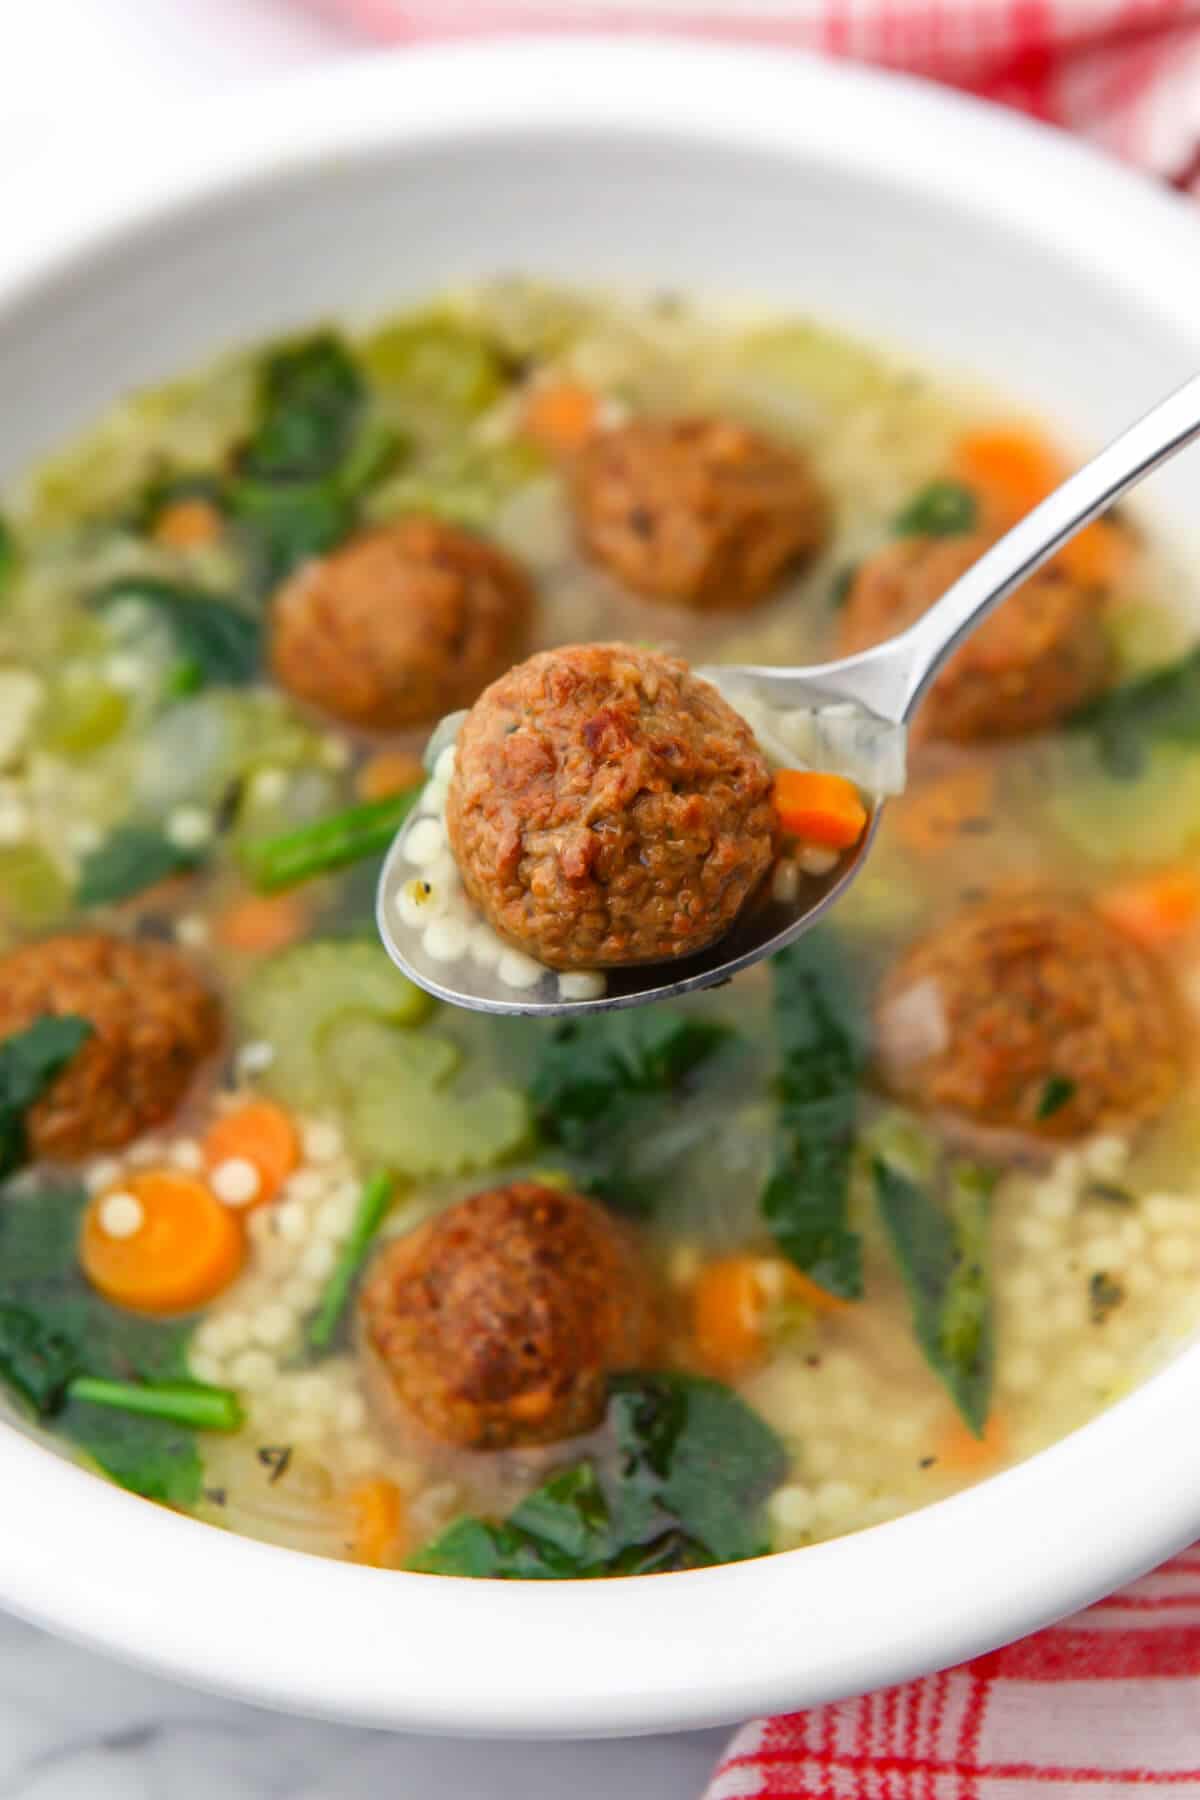 A top view of vegan wedding soup with a meatball in a spoon over the bowl of soup.